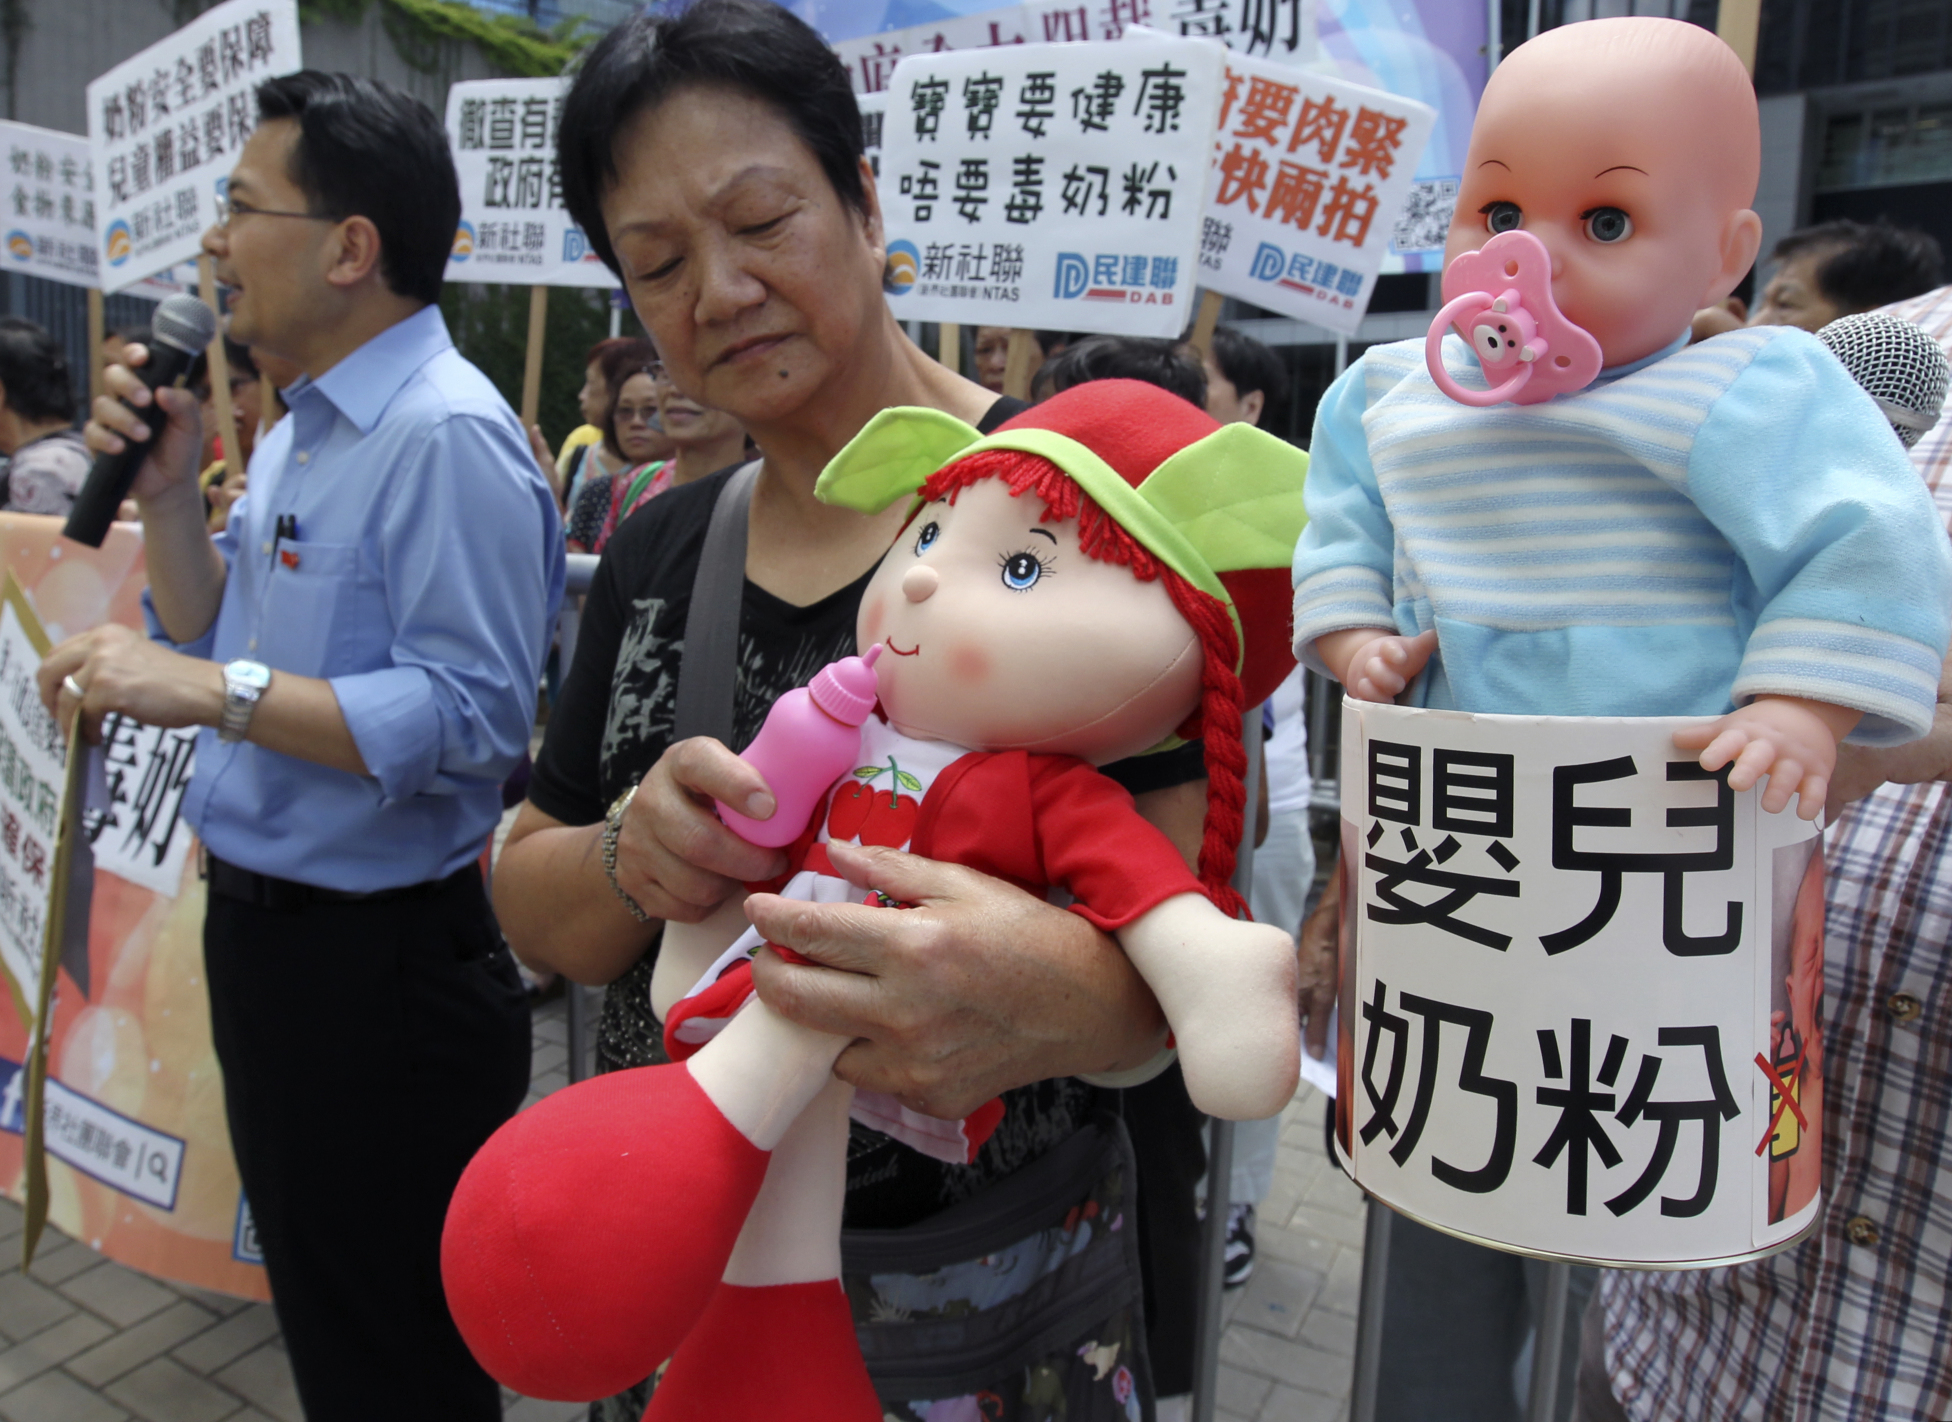 Members of New Territories Association of Societies (NTAS) protest over food safety concerns in baby formula, at Central Government Offices, Admiralty. Photo: Dickson Lee